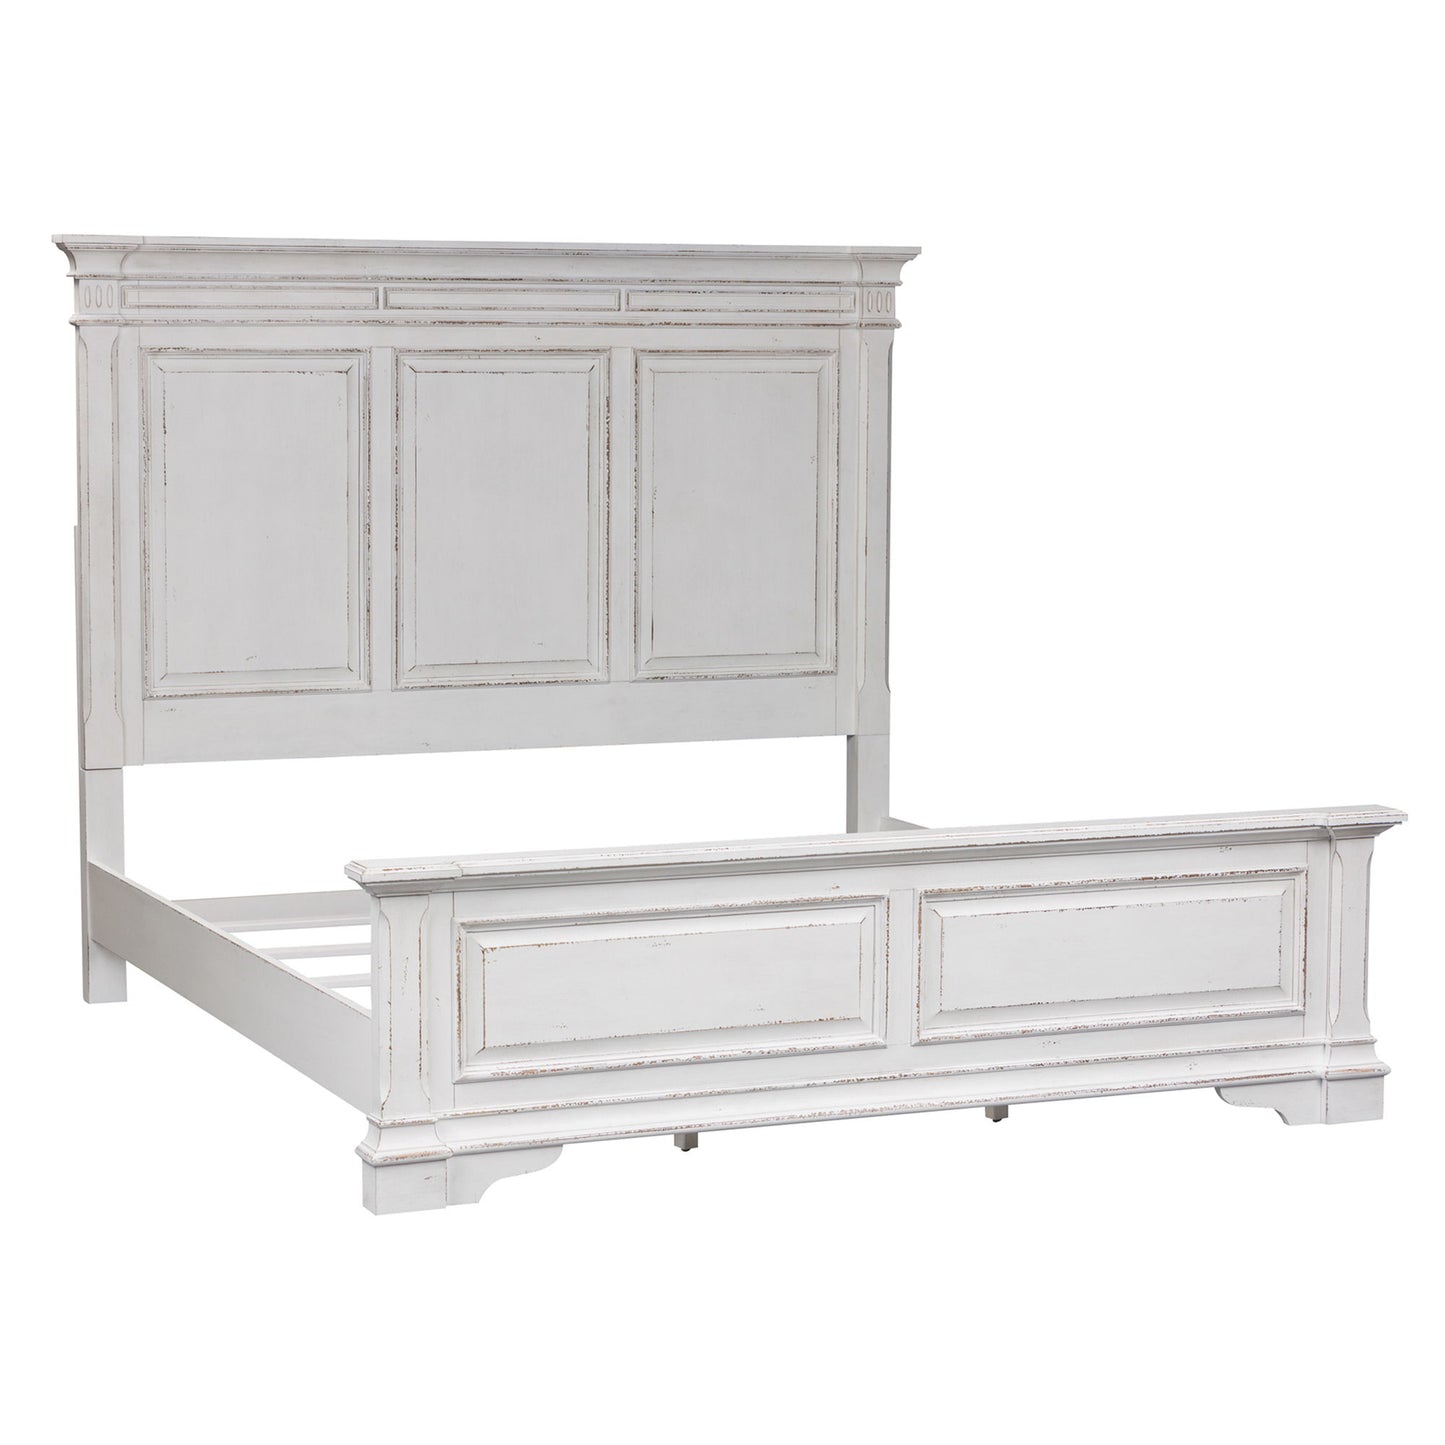 Abbey Park - King Panel Bed - White